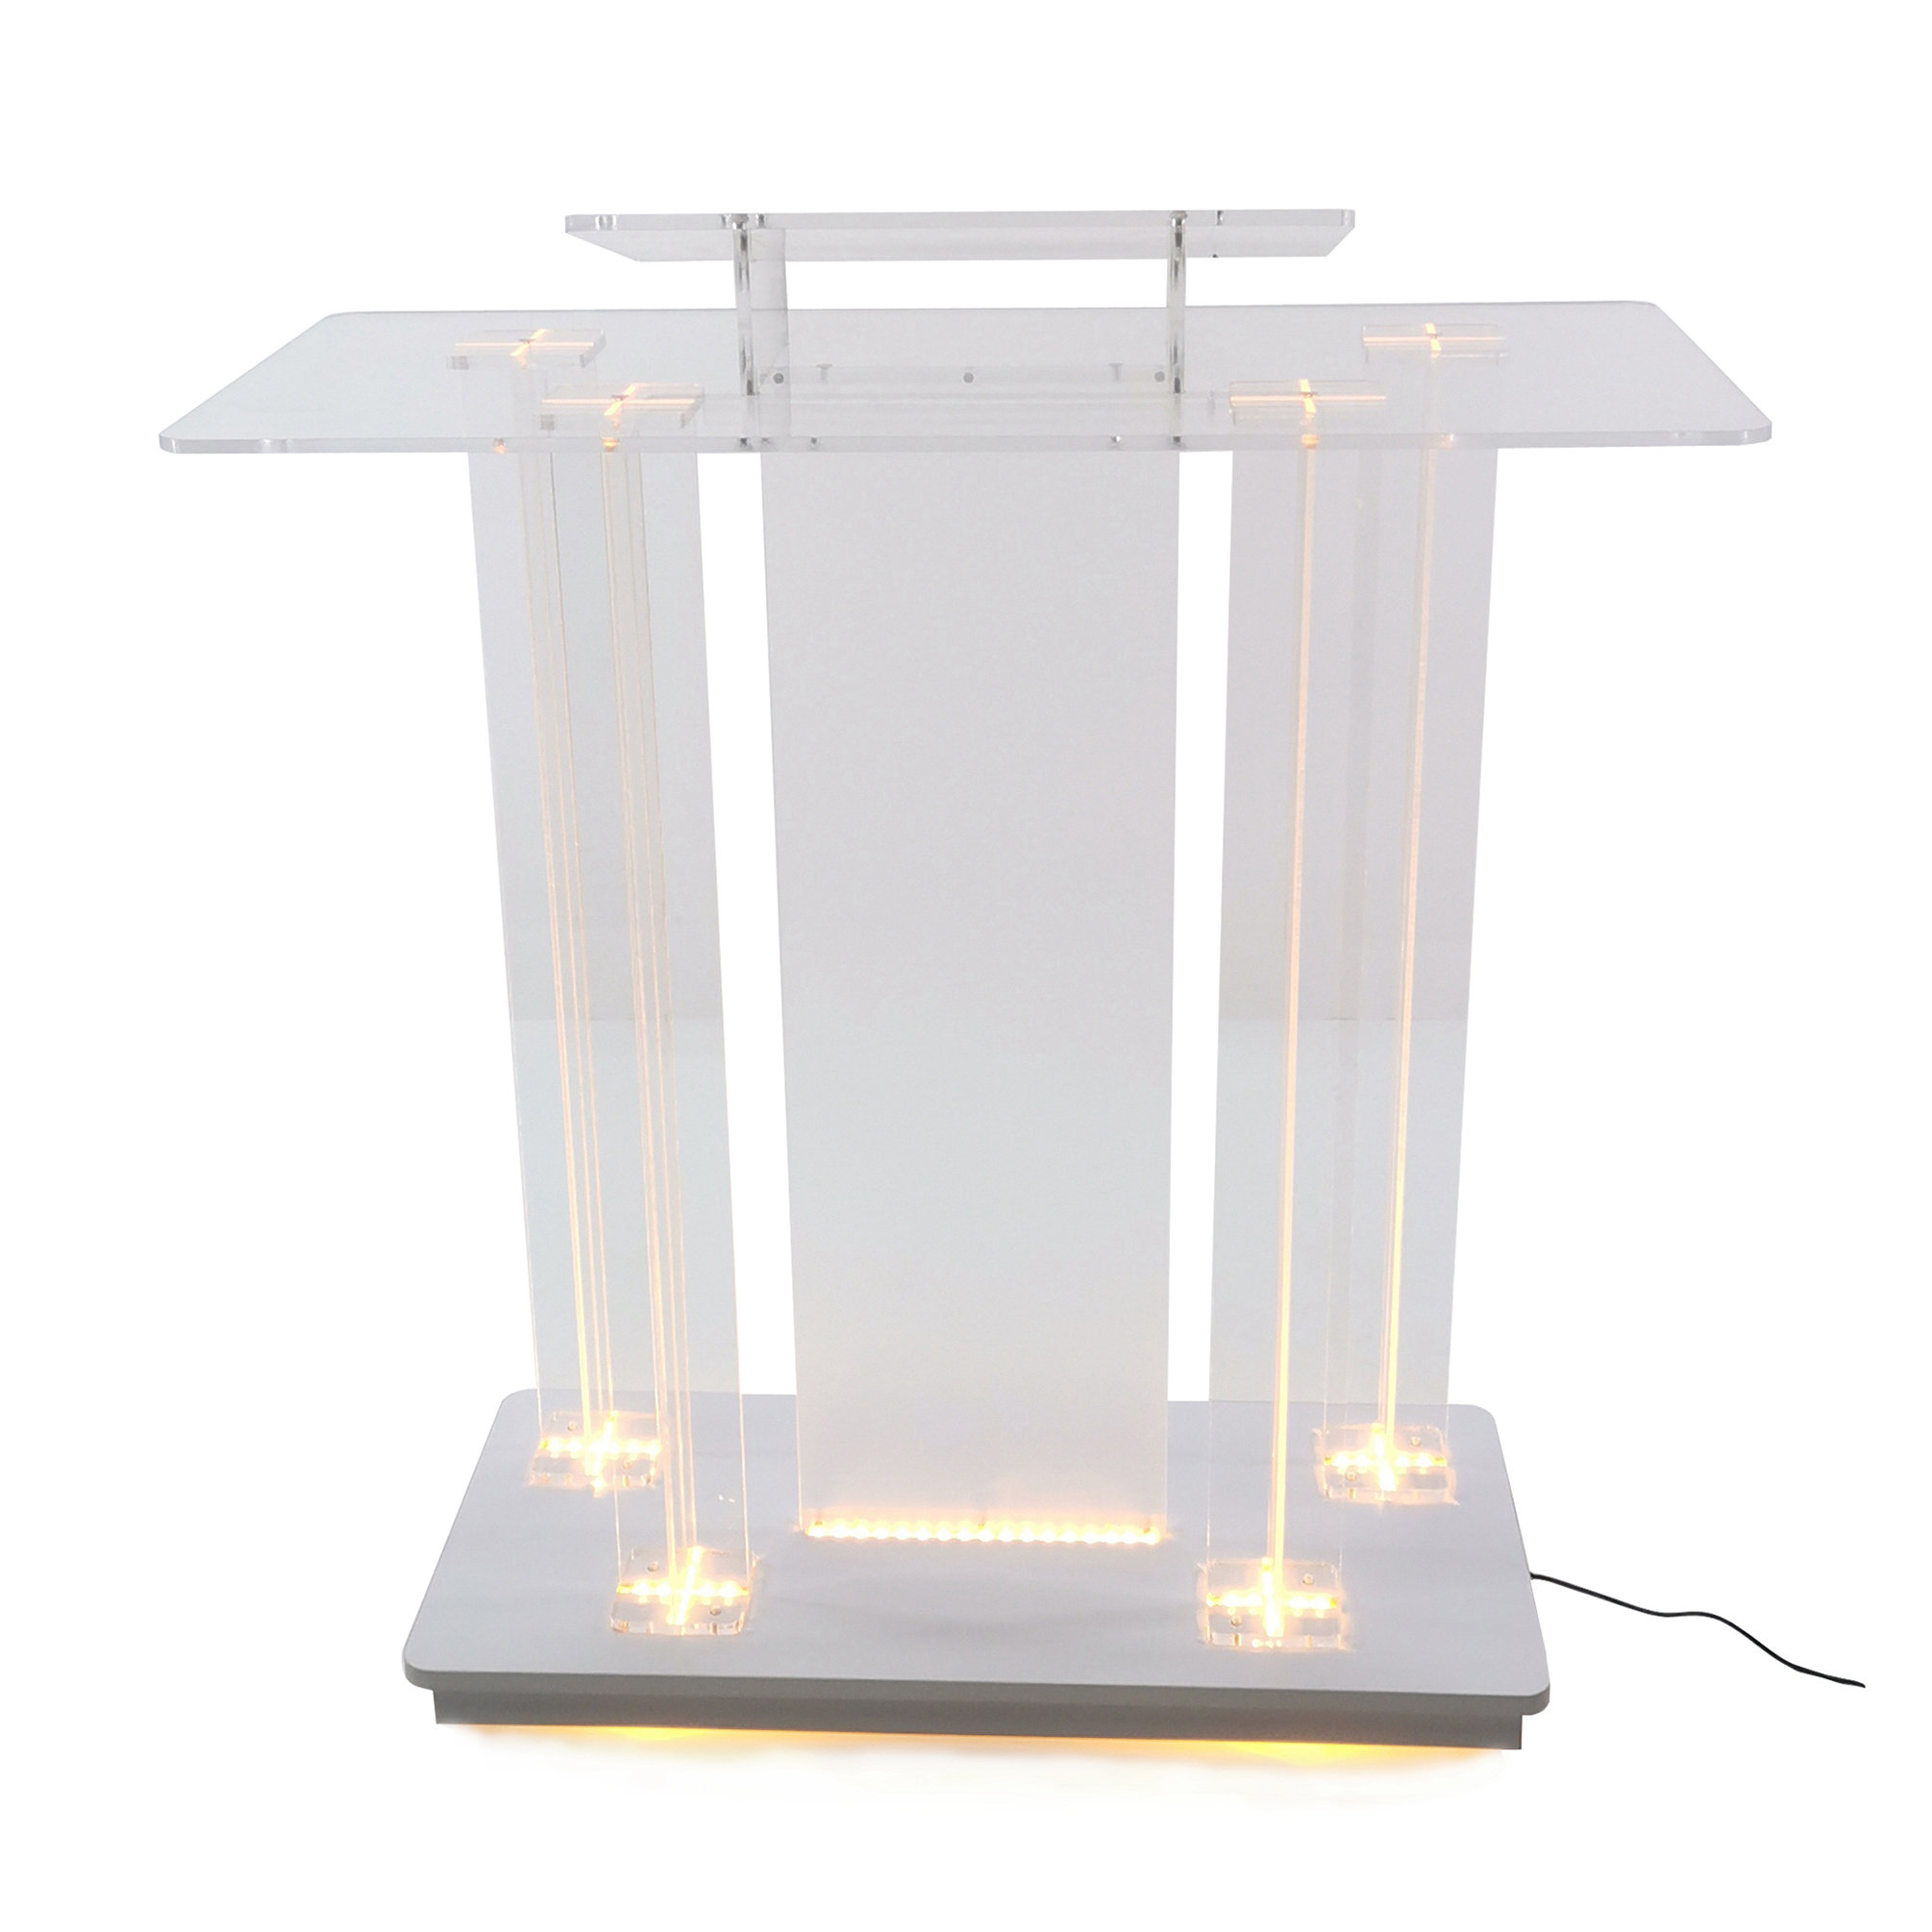 Acrylic Podium Pulpit Conference Church Black Stand Lectern Pulpit Office 